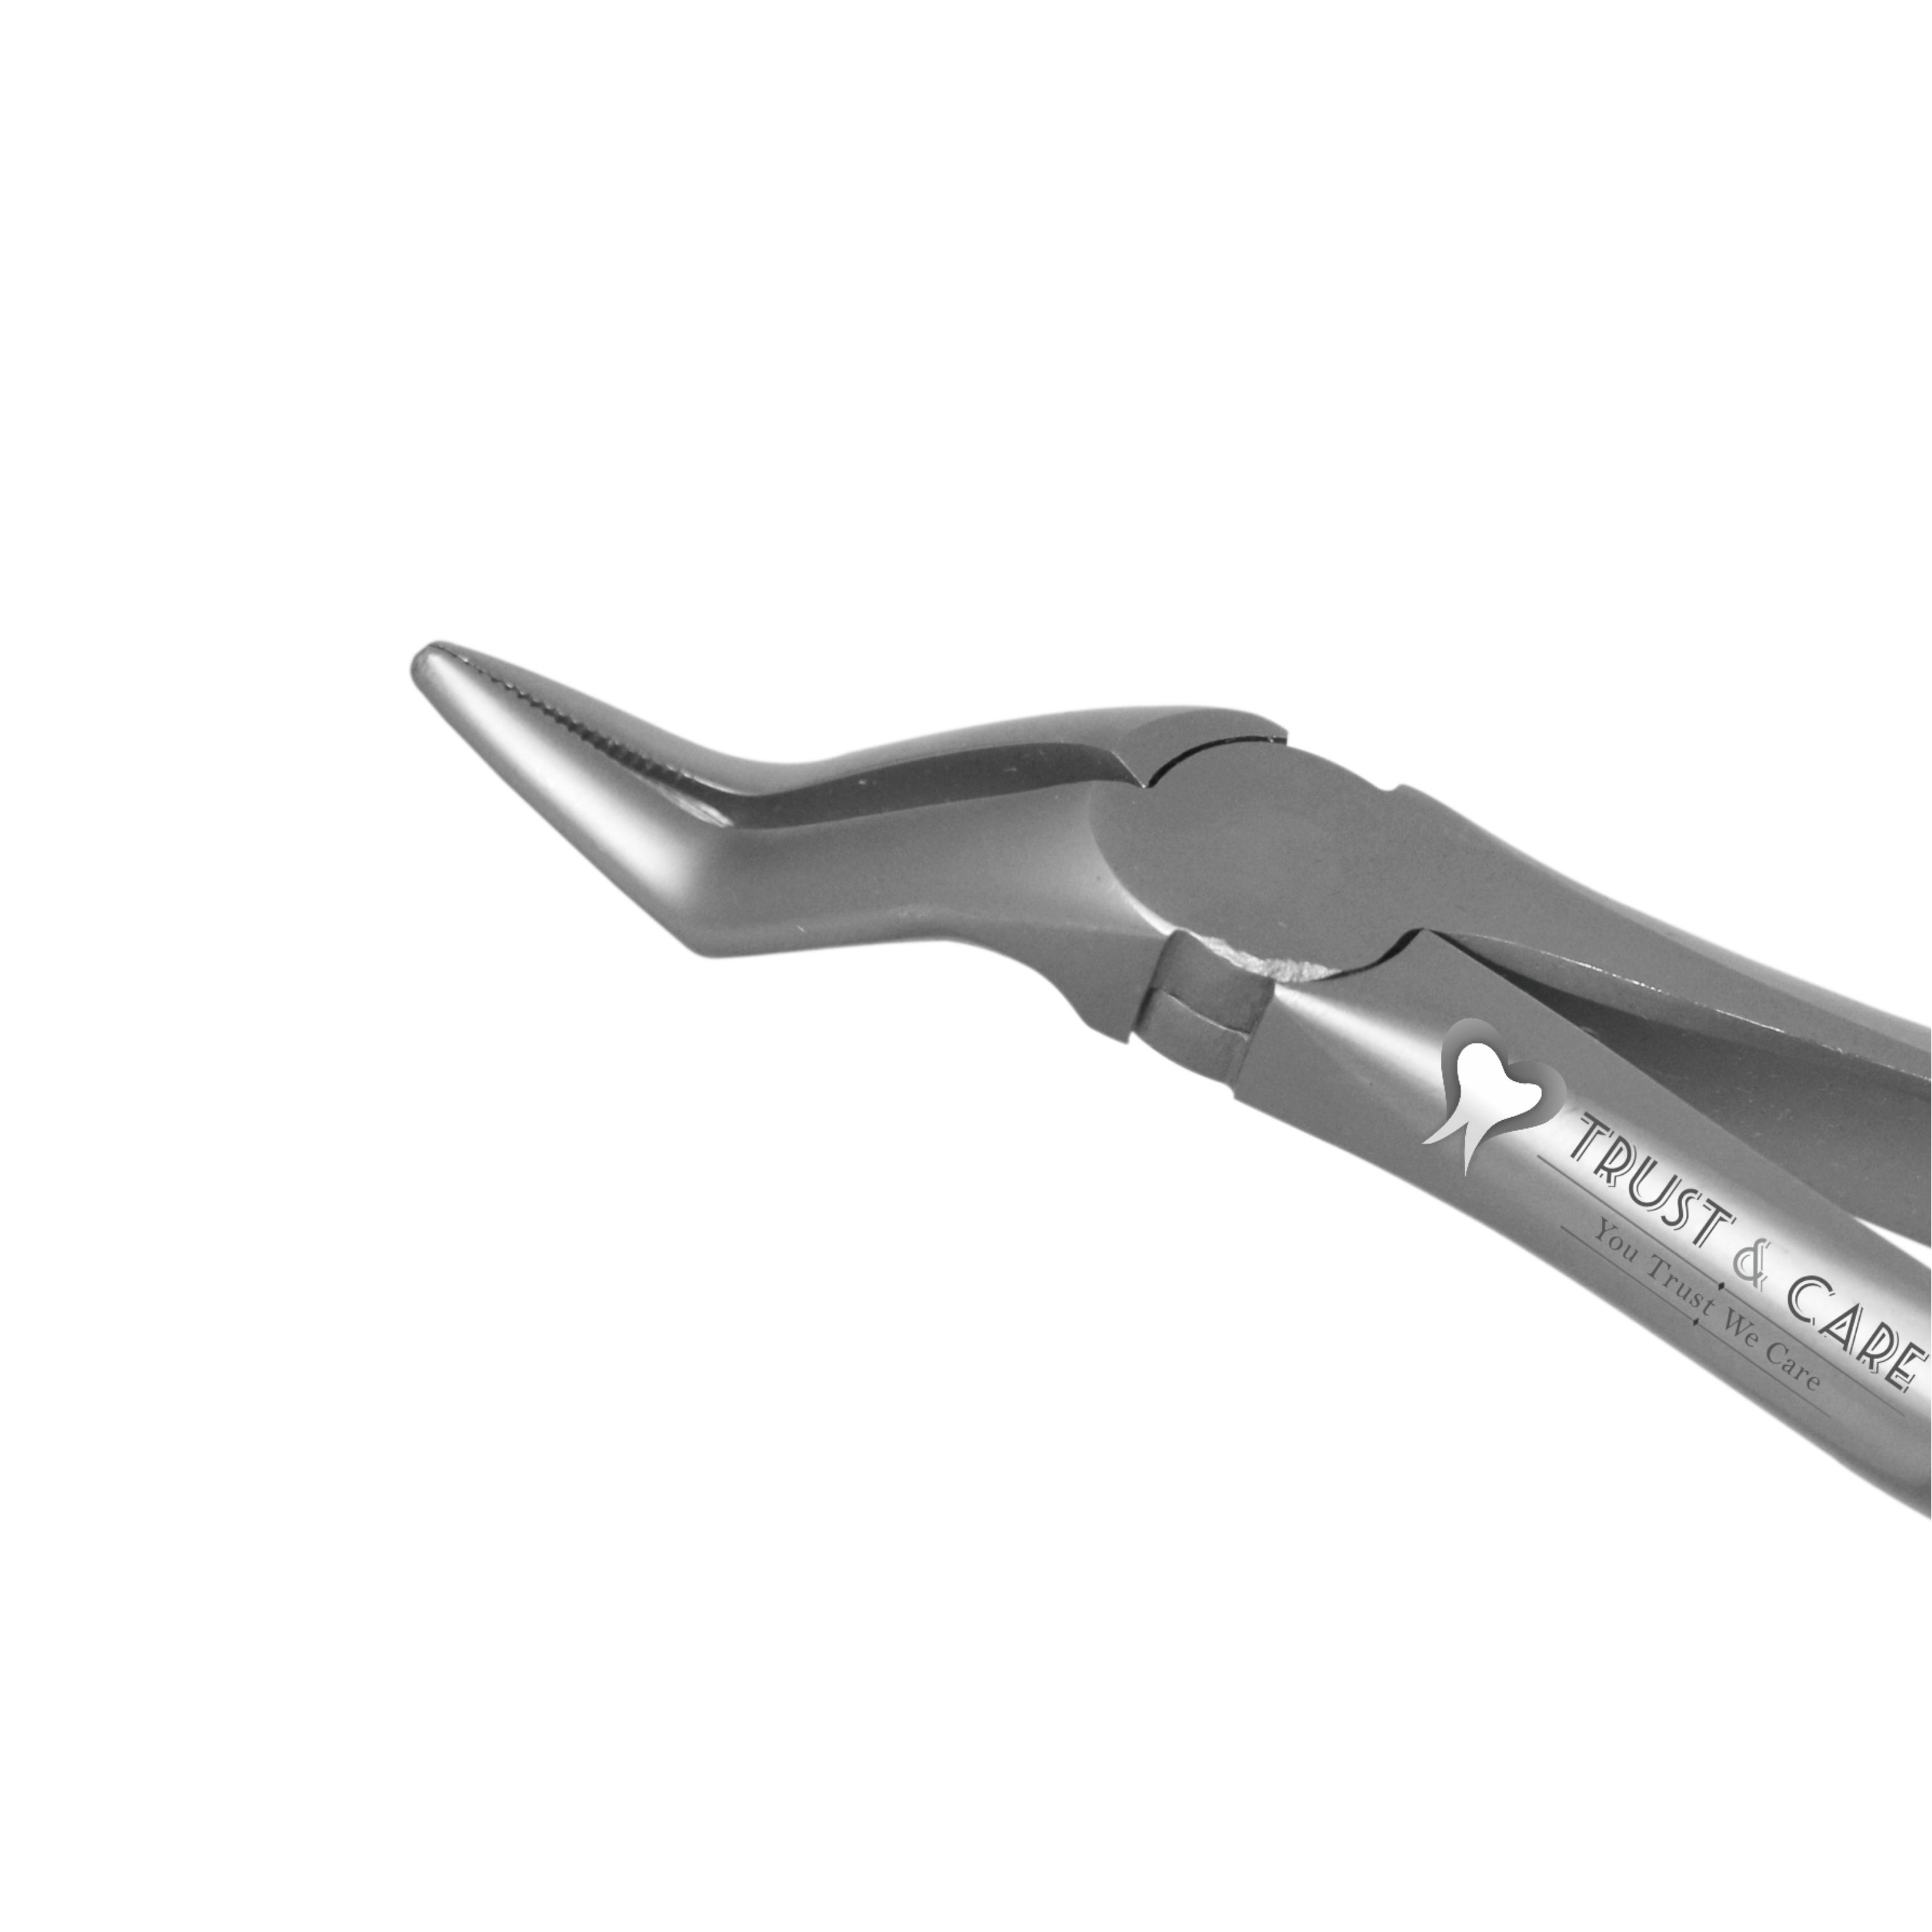 Trust & Care Secure Forcep Upper Roots Fig No. 197.11